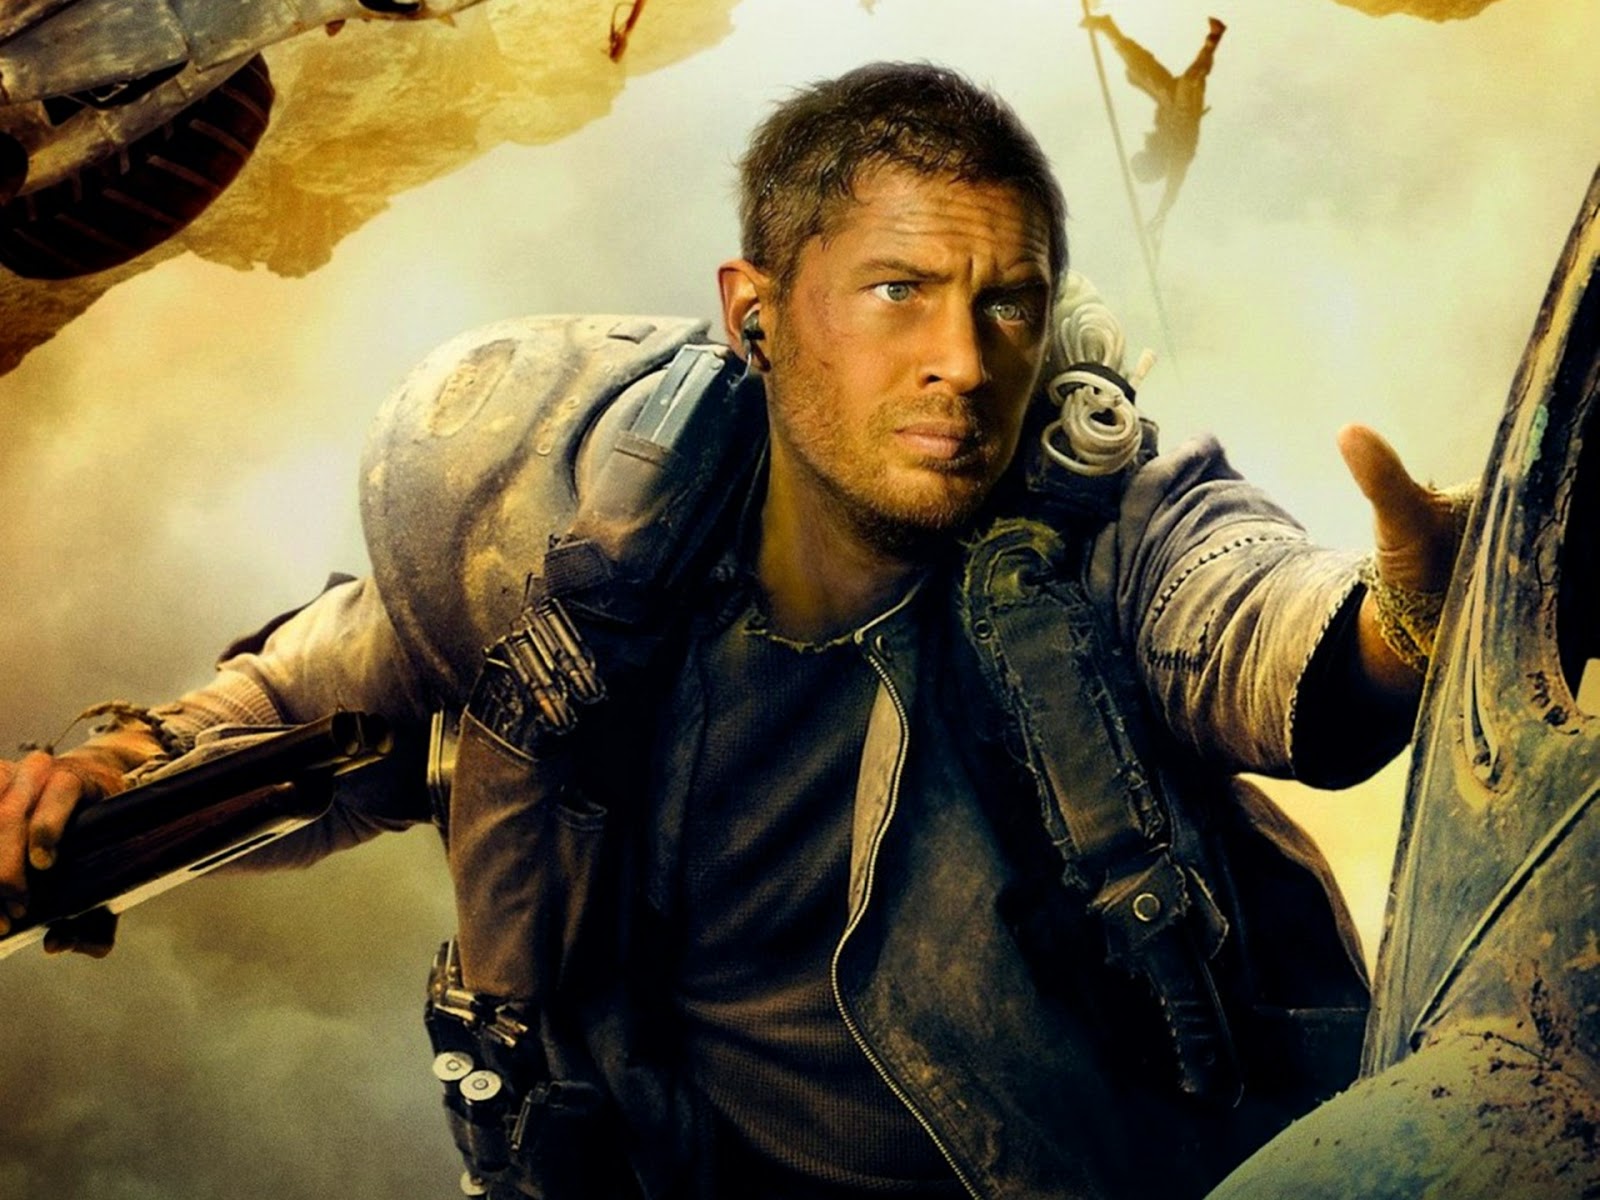  mad max fury road movie 2015 background and the enjoy the great screen